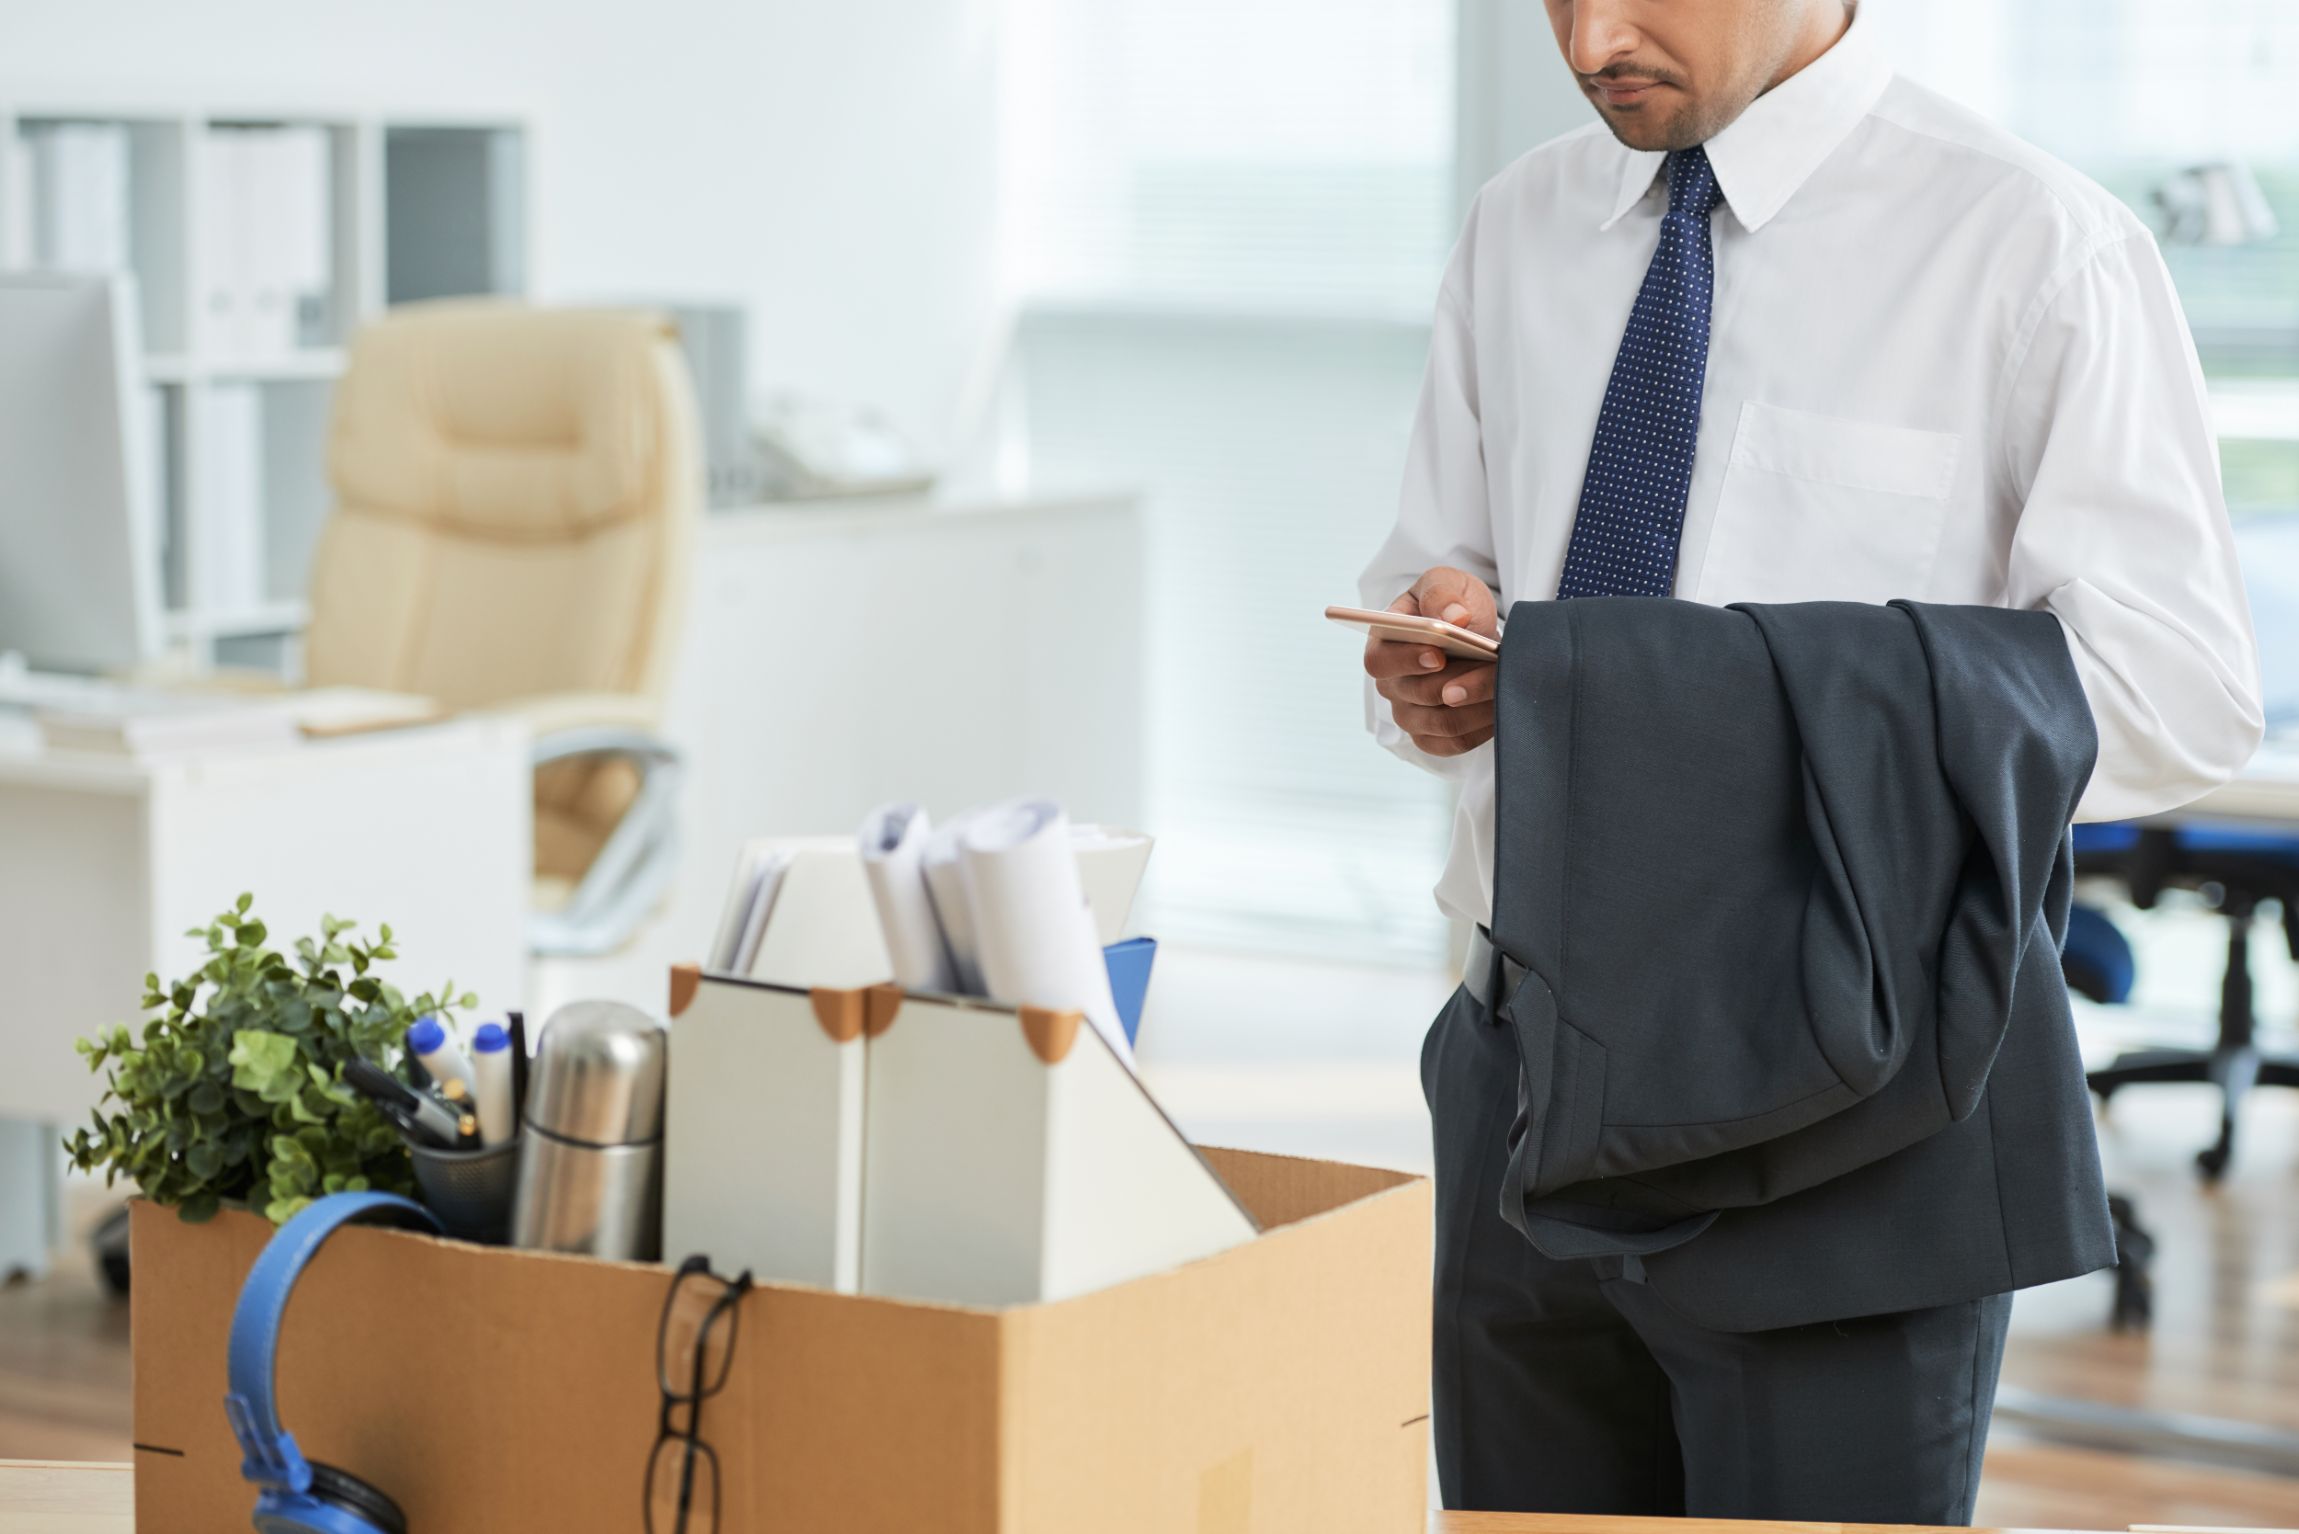 Men packing his things as he is leaving the company